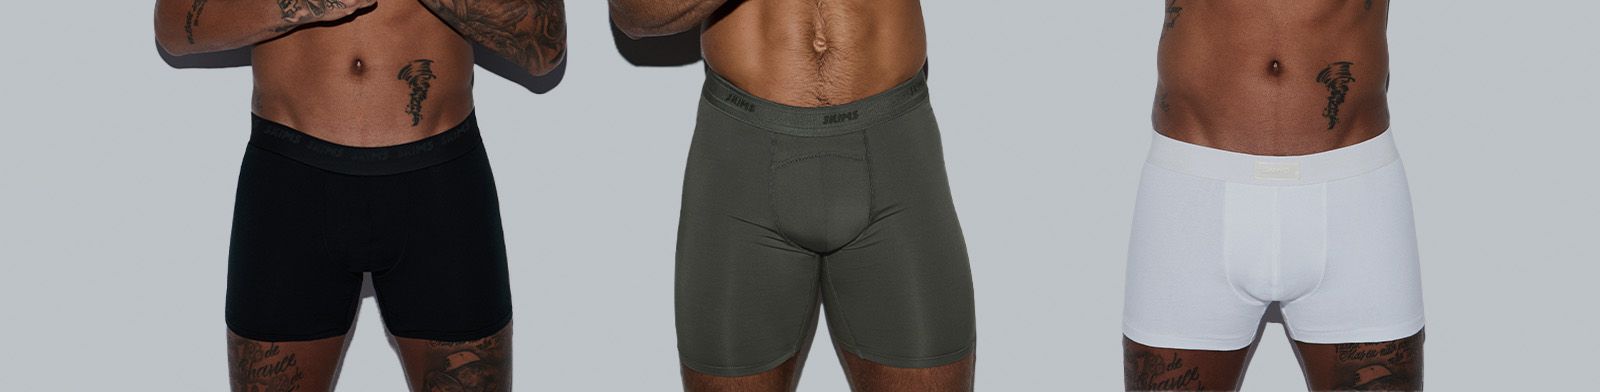 How to Find Your Perfect Fit with SKIMS Men's Boxer Briefs